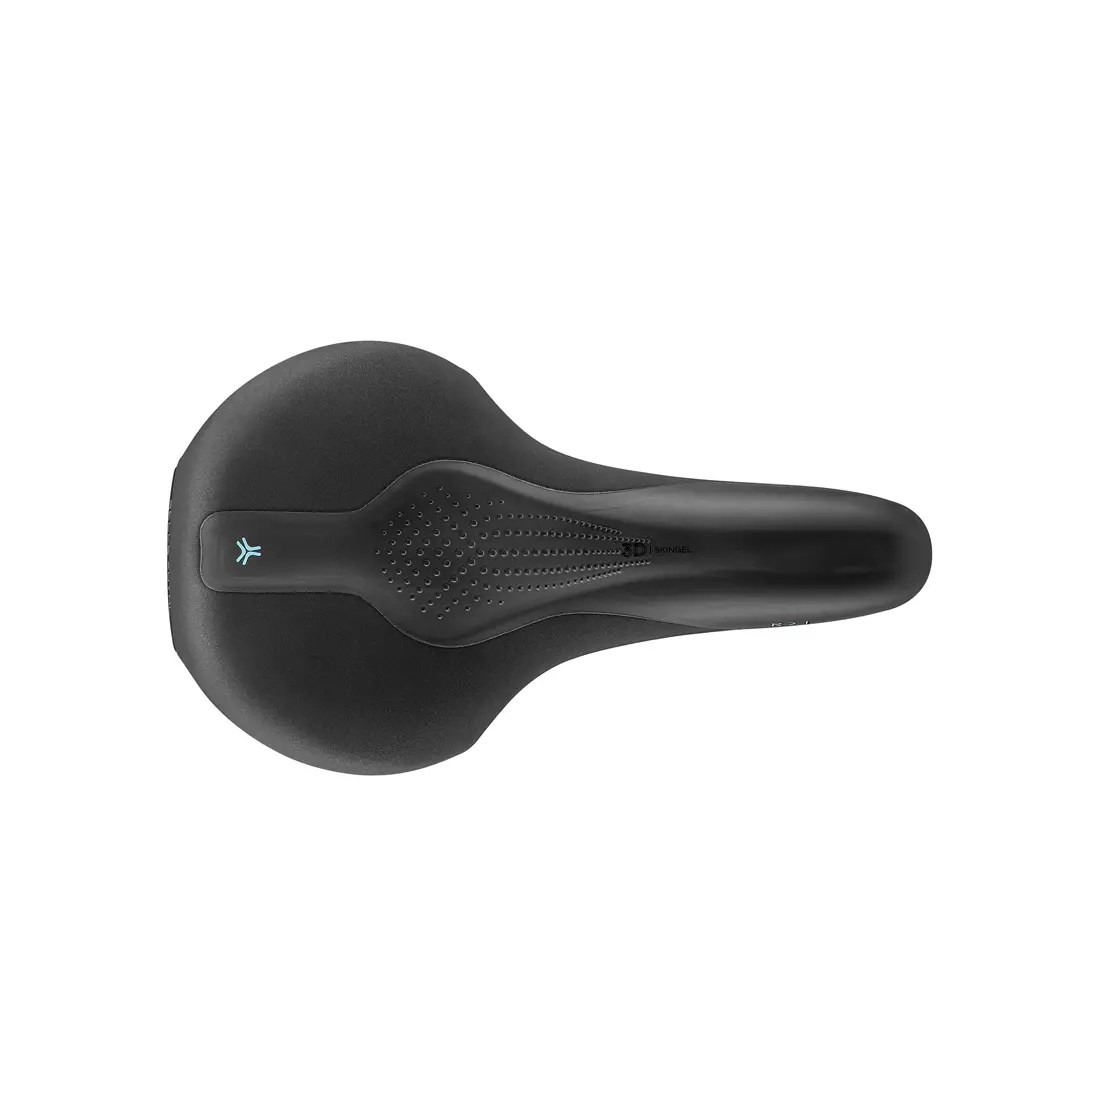 Bicycle saddle SELLEROYAL SCIENTIA RELAXED R1 SMALL 90st. gel + elastomers unisex SR-54R0SB0A09210